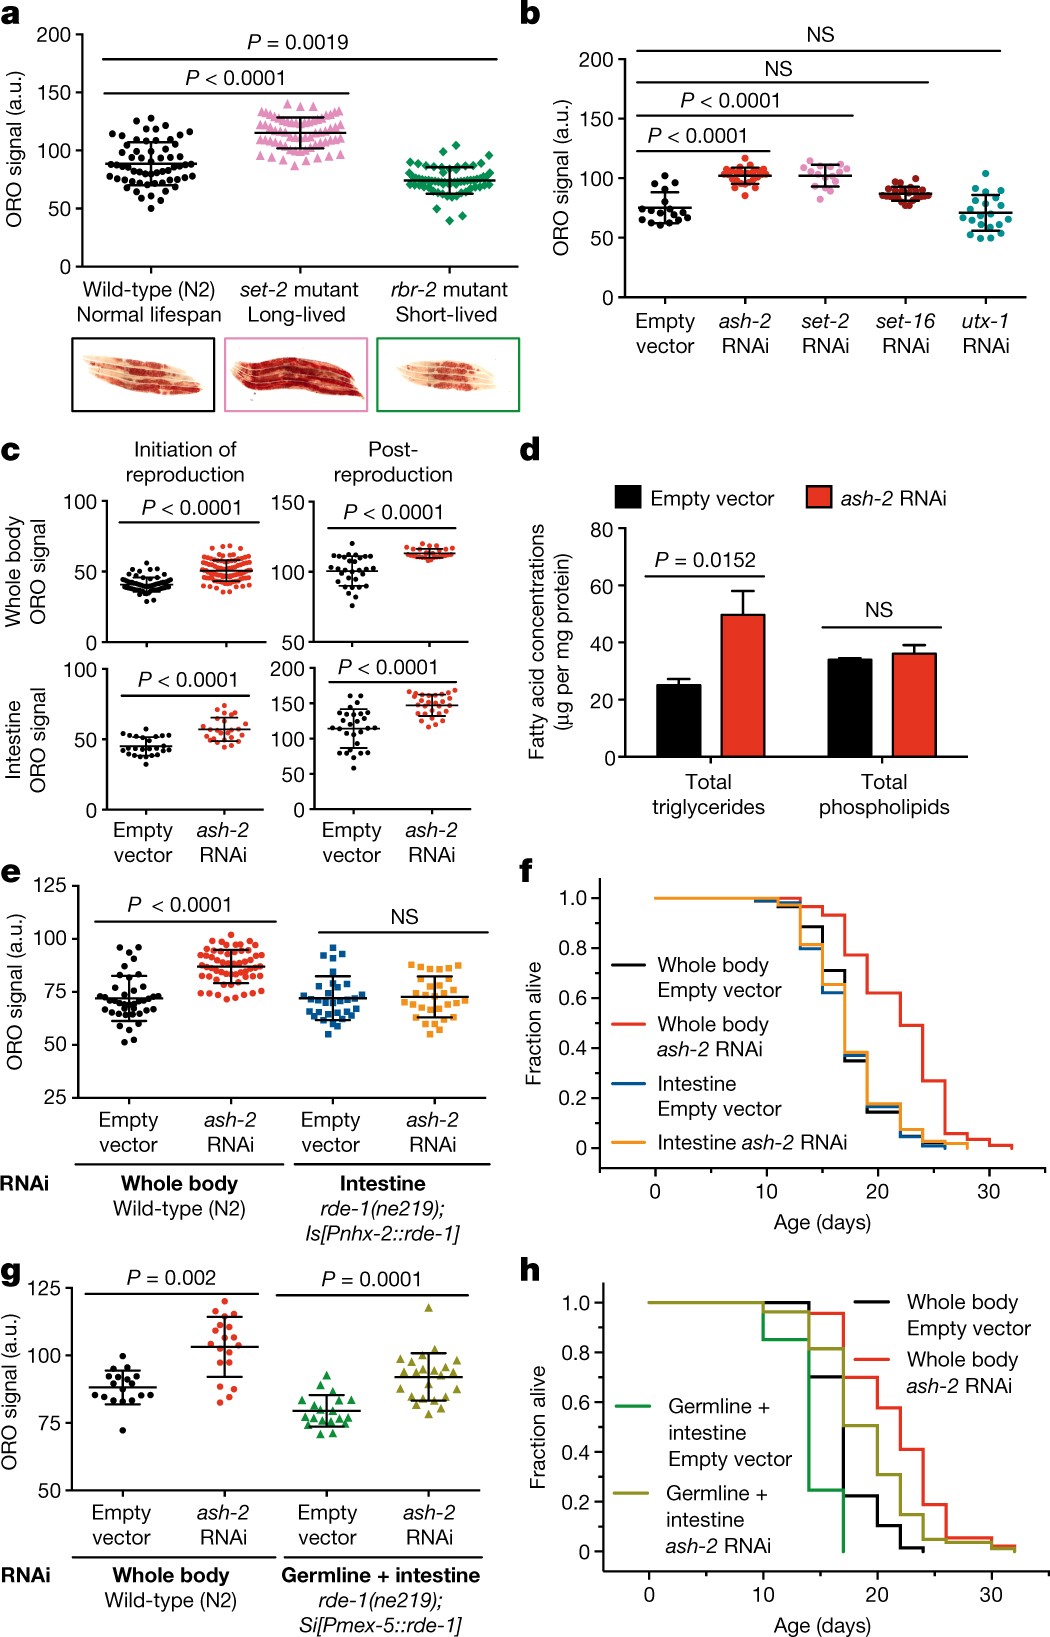 Mono-unsaturated fatty acids link H3K4me3 modifiers to C. elegans lifespan  | Nature